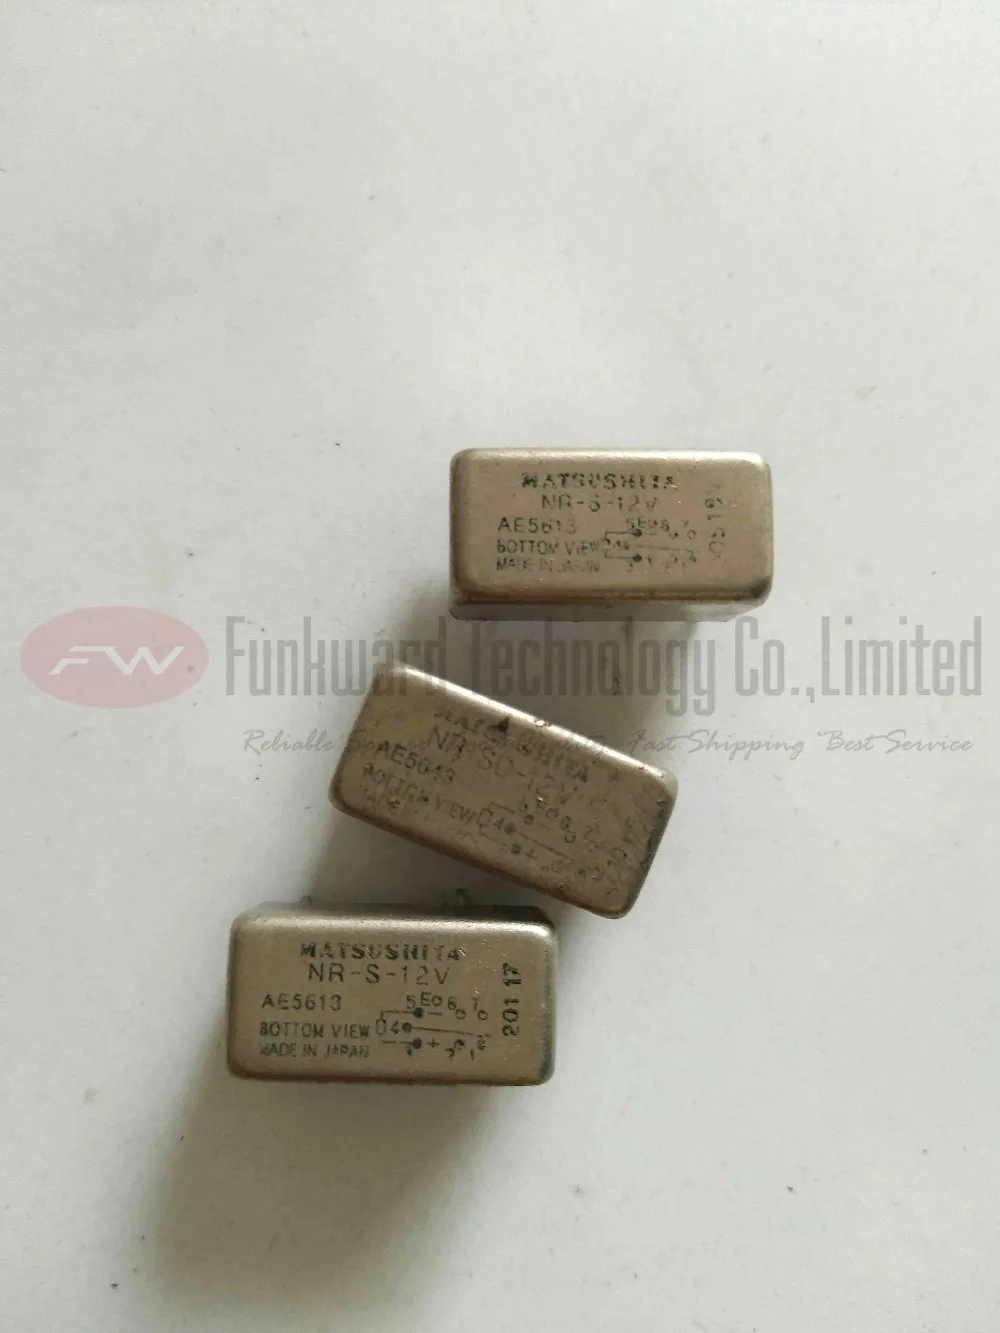 RS-24V NR-SD-5V NR-SD-12V Metal Sealed Reed Relay 3A 125VAC 8 Pins | Relays